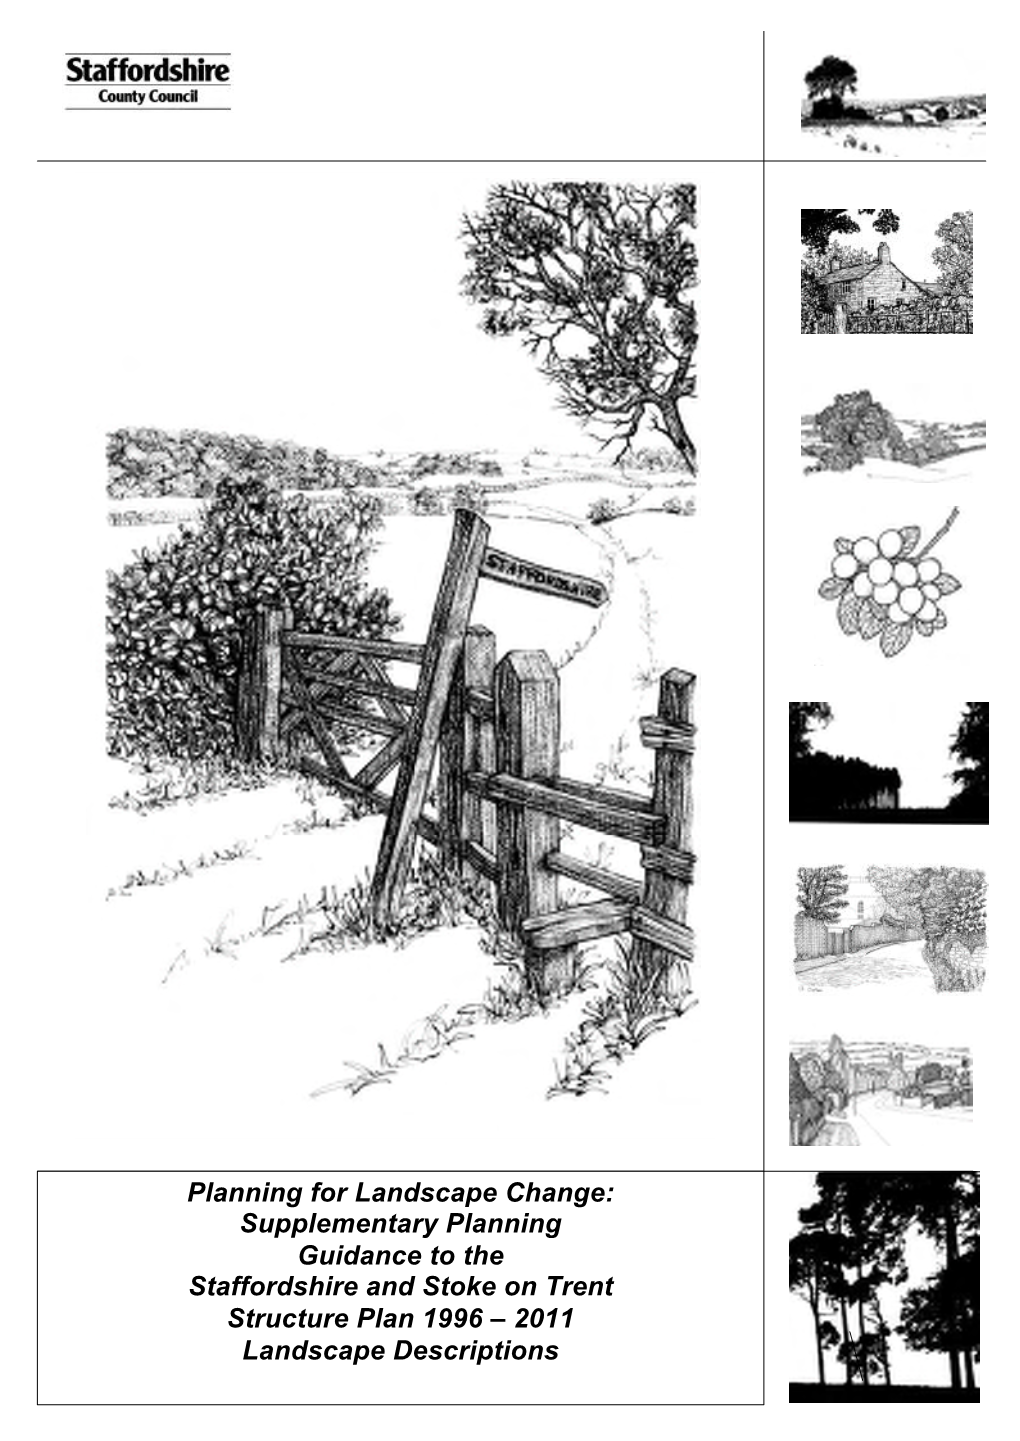 Planning for Landscape Change: Supplementary Planning Guidance to the Staffordshire and Stoke on Trent Structure Plan 1996